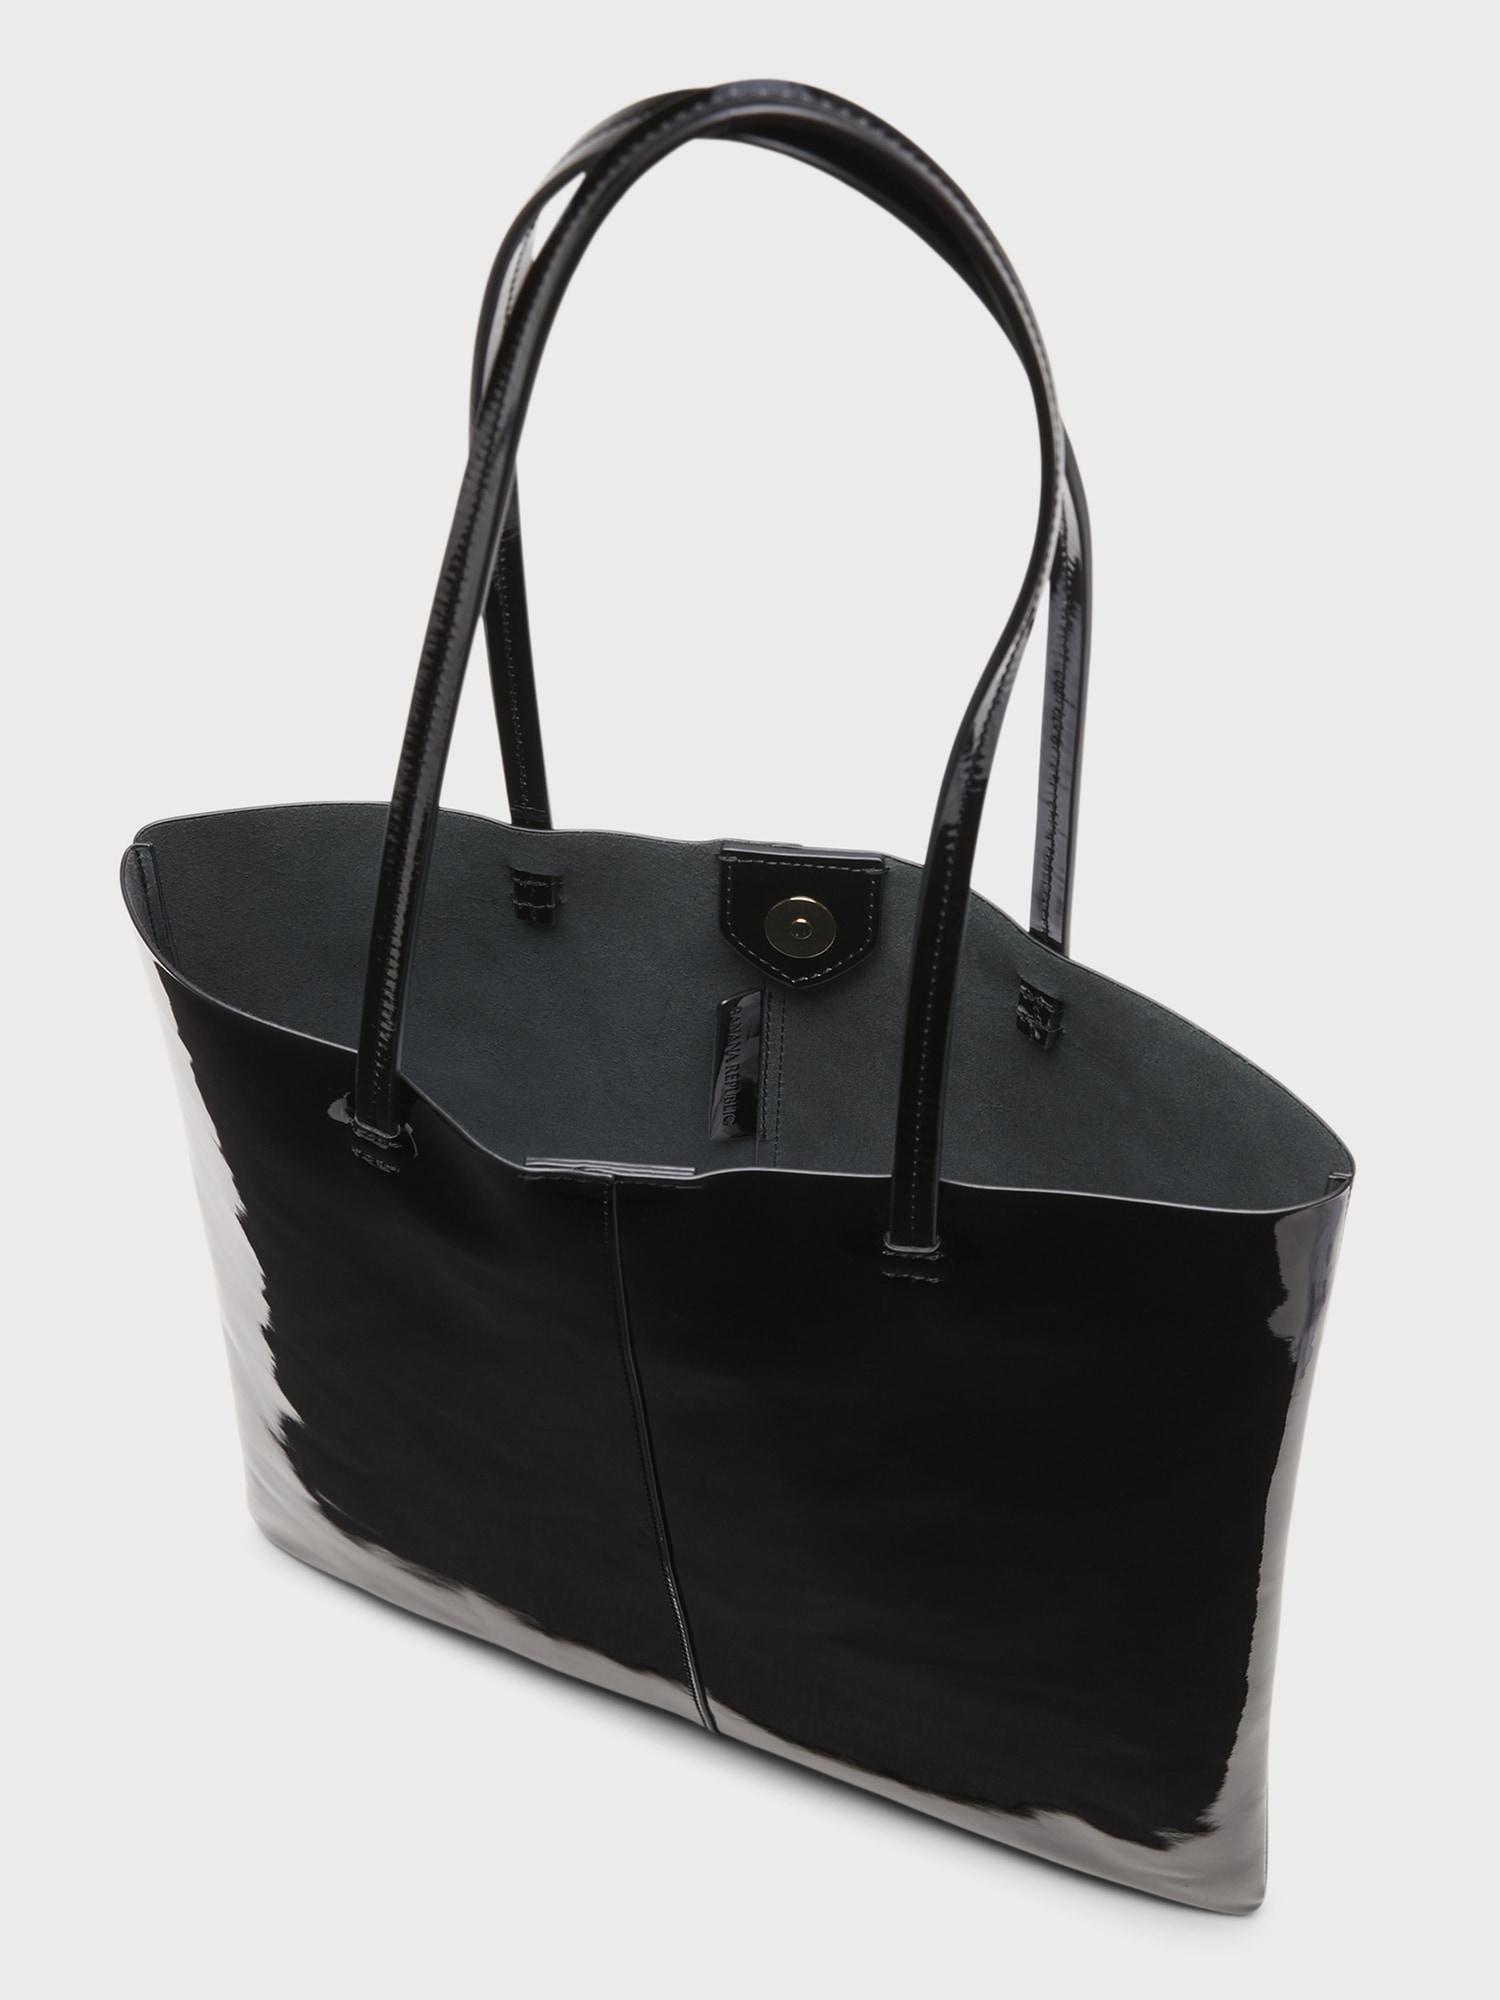 Banana Republic Leather Effortless Tote in Black - Lyst